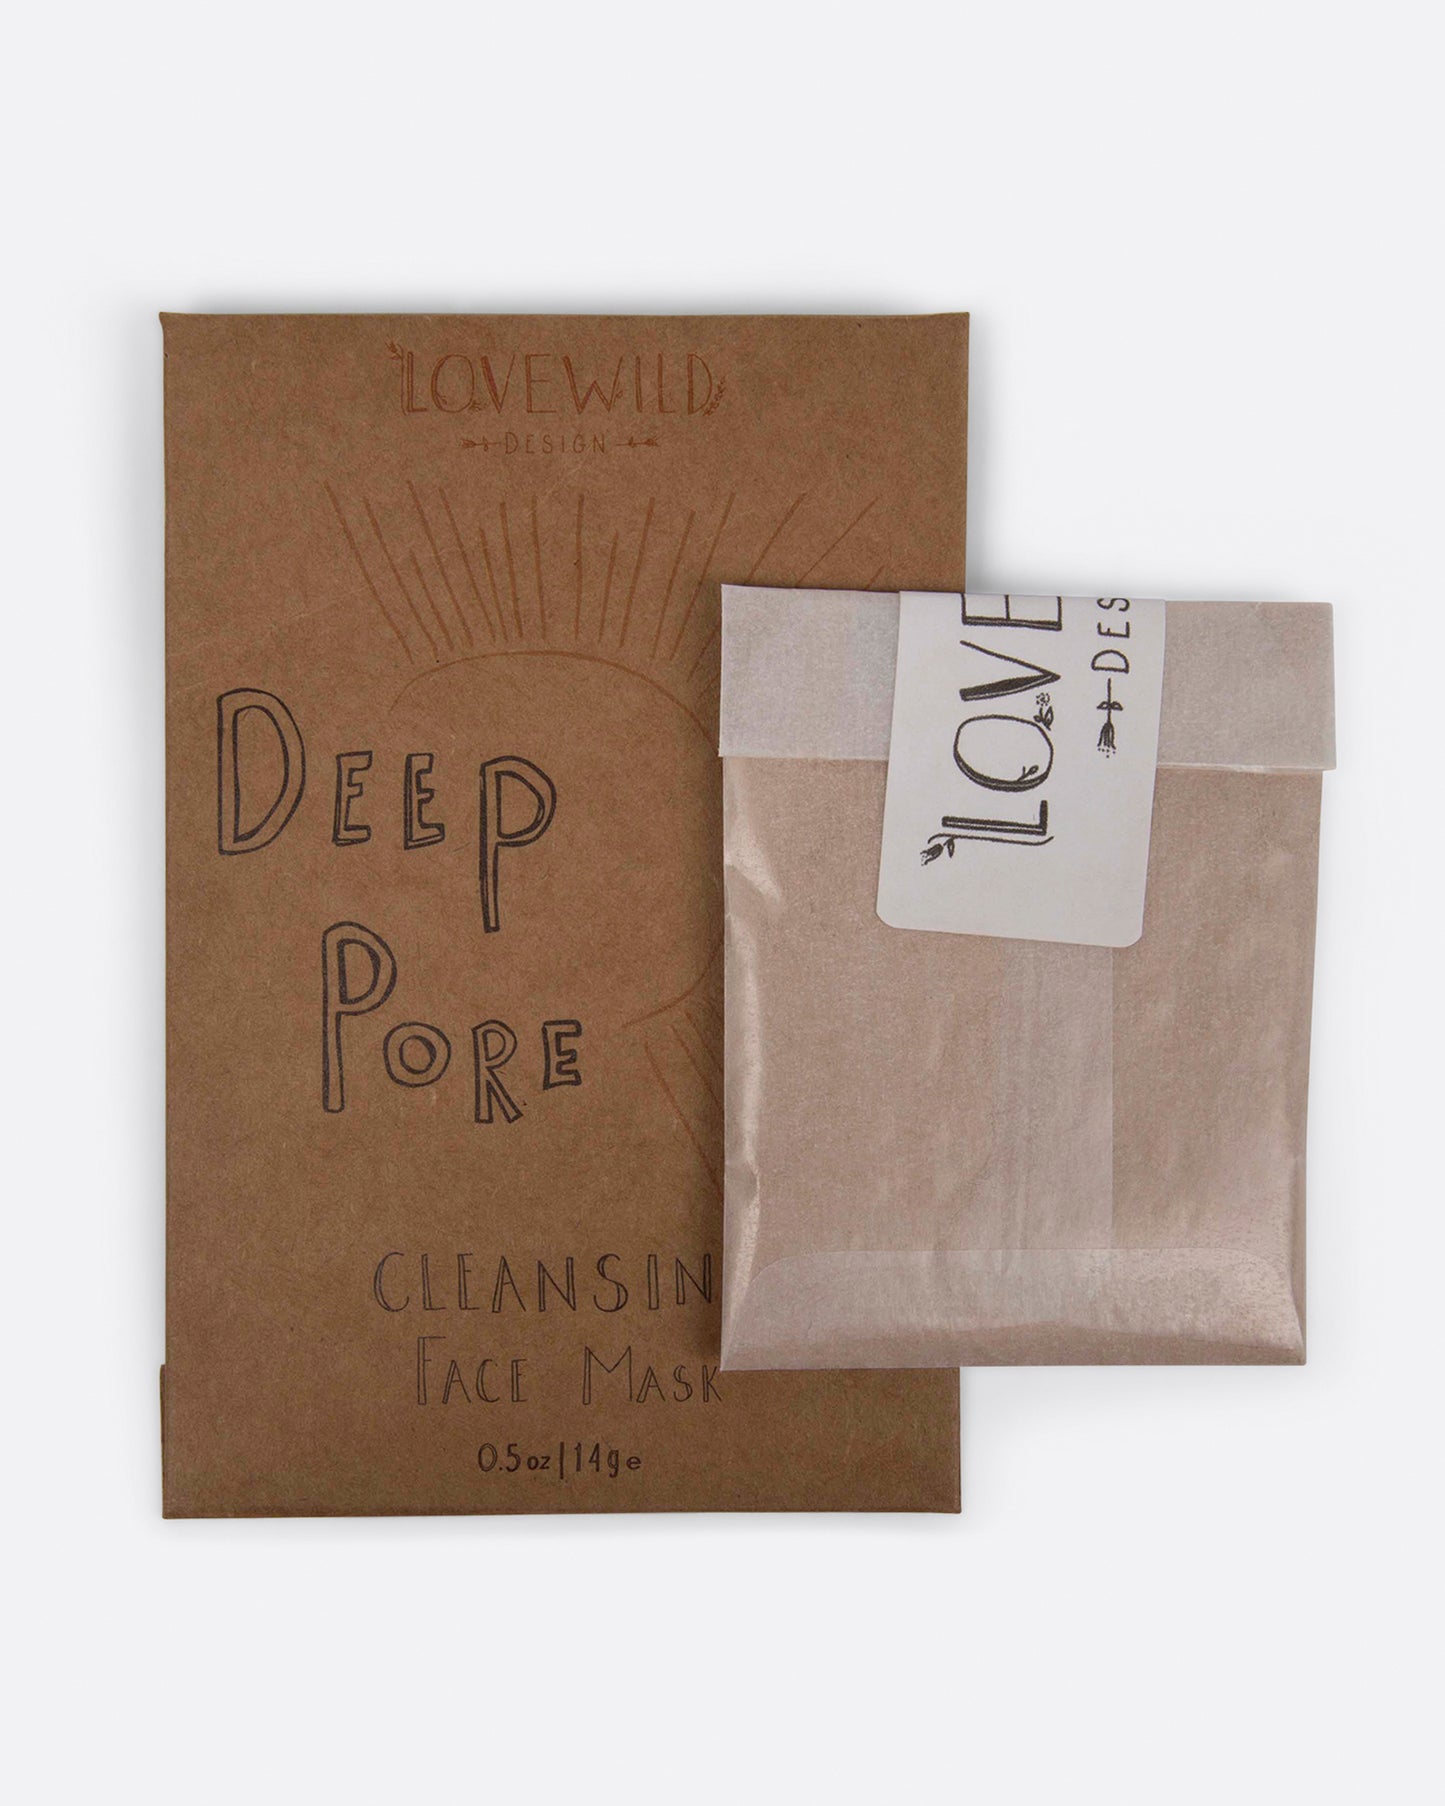 The kraft paper envelope packing of the Deep Pore Cleansing Face Mask shown with the packet containing the powder form of the mask. 